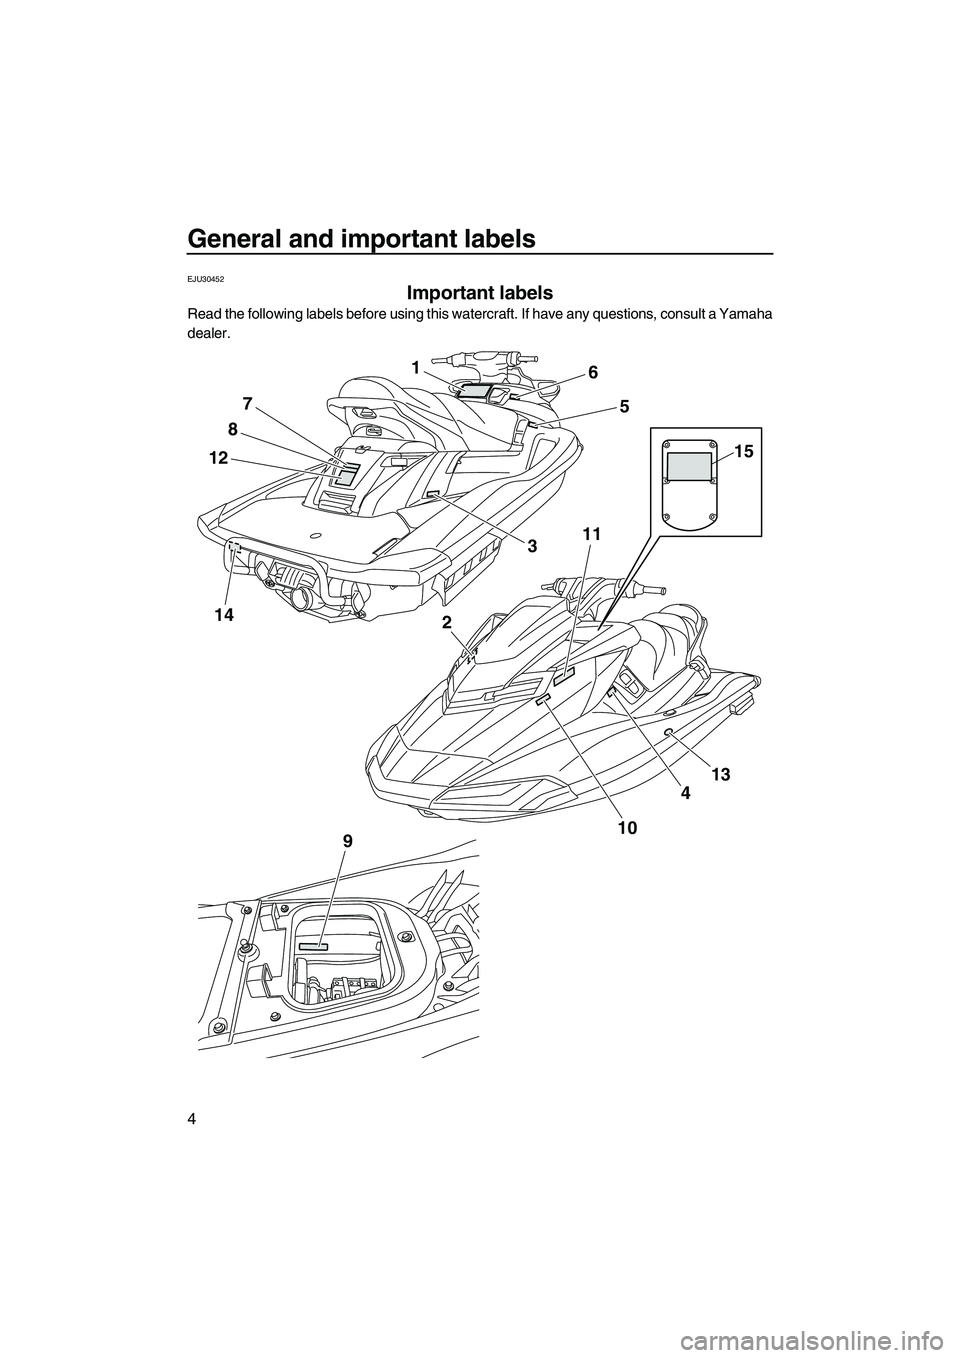 YAMAHA FX HO 2013  Owners Manual General and important labels
4
EJU30452
Important labels 
Read the following labels before using this watercraft. If have any questions, consult a Yamaha
dealer.
14
1
12
8
7
11
2
9
4
13
10
6
5
3
15
UF